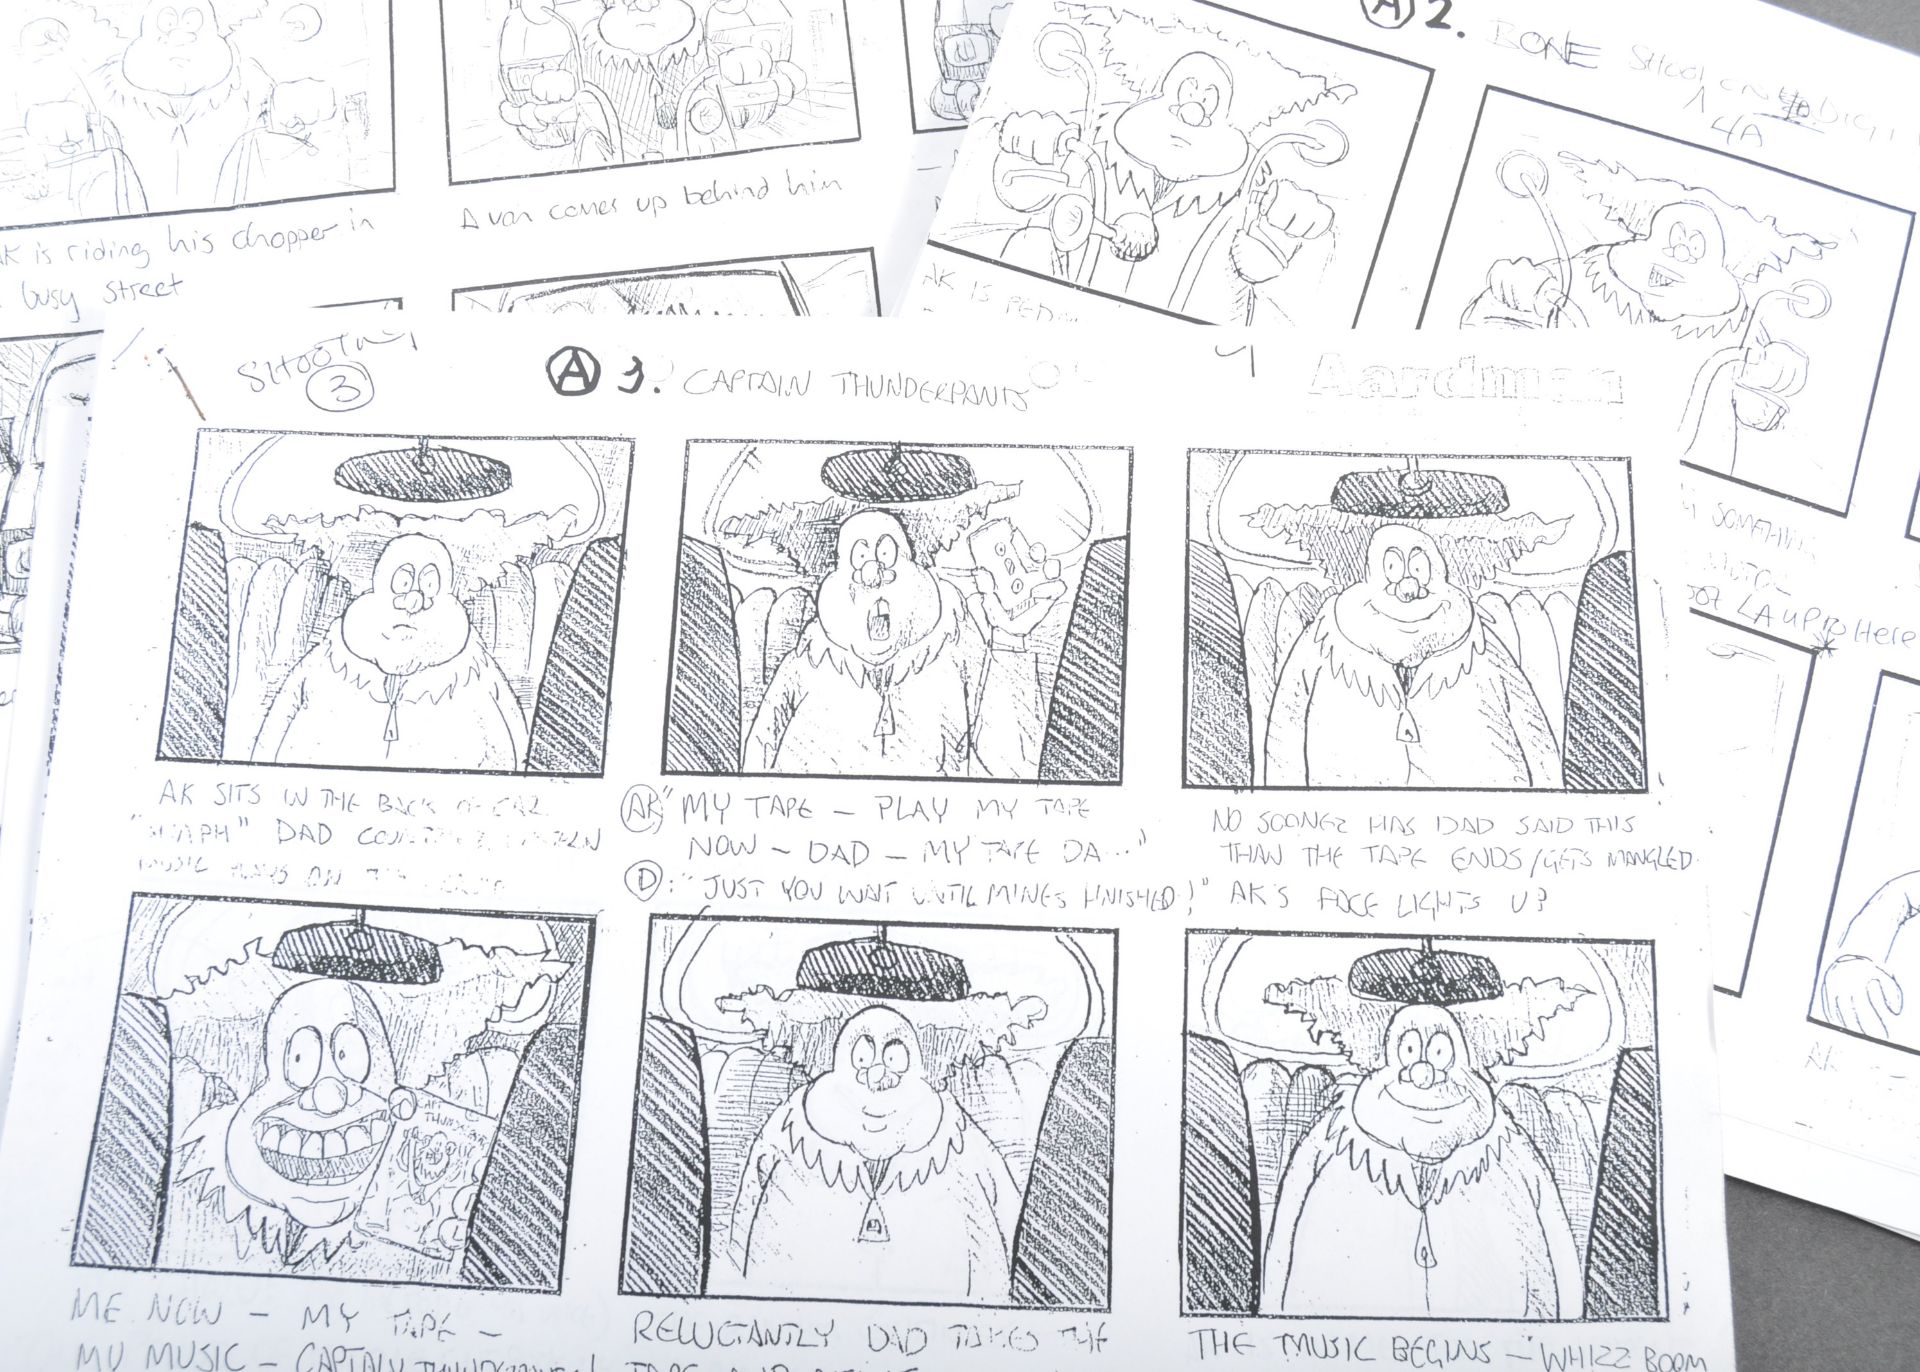 AARDMAN ANIMATIONS - ANGRY KID (1999) - PRODUCTION STORYBOARDS - Image 2 of 7